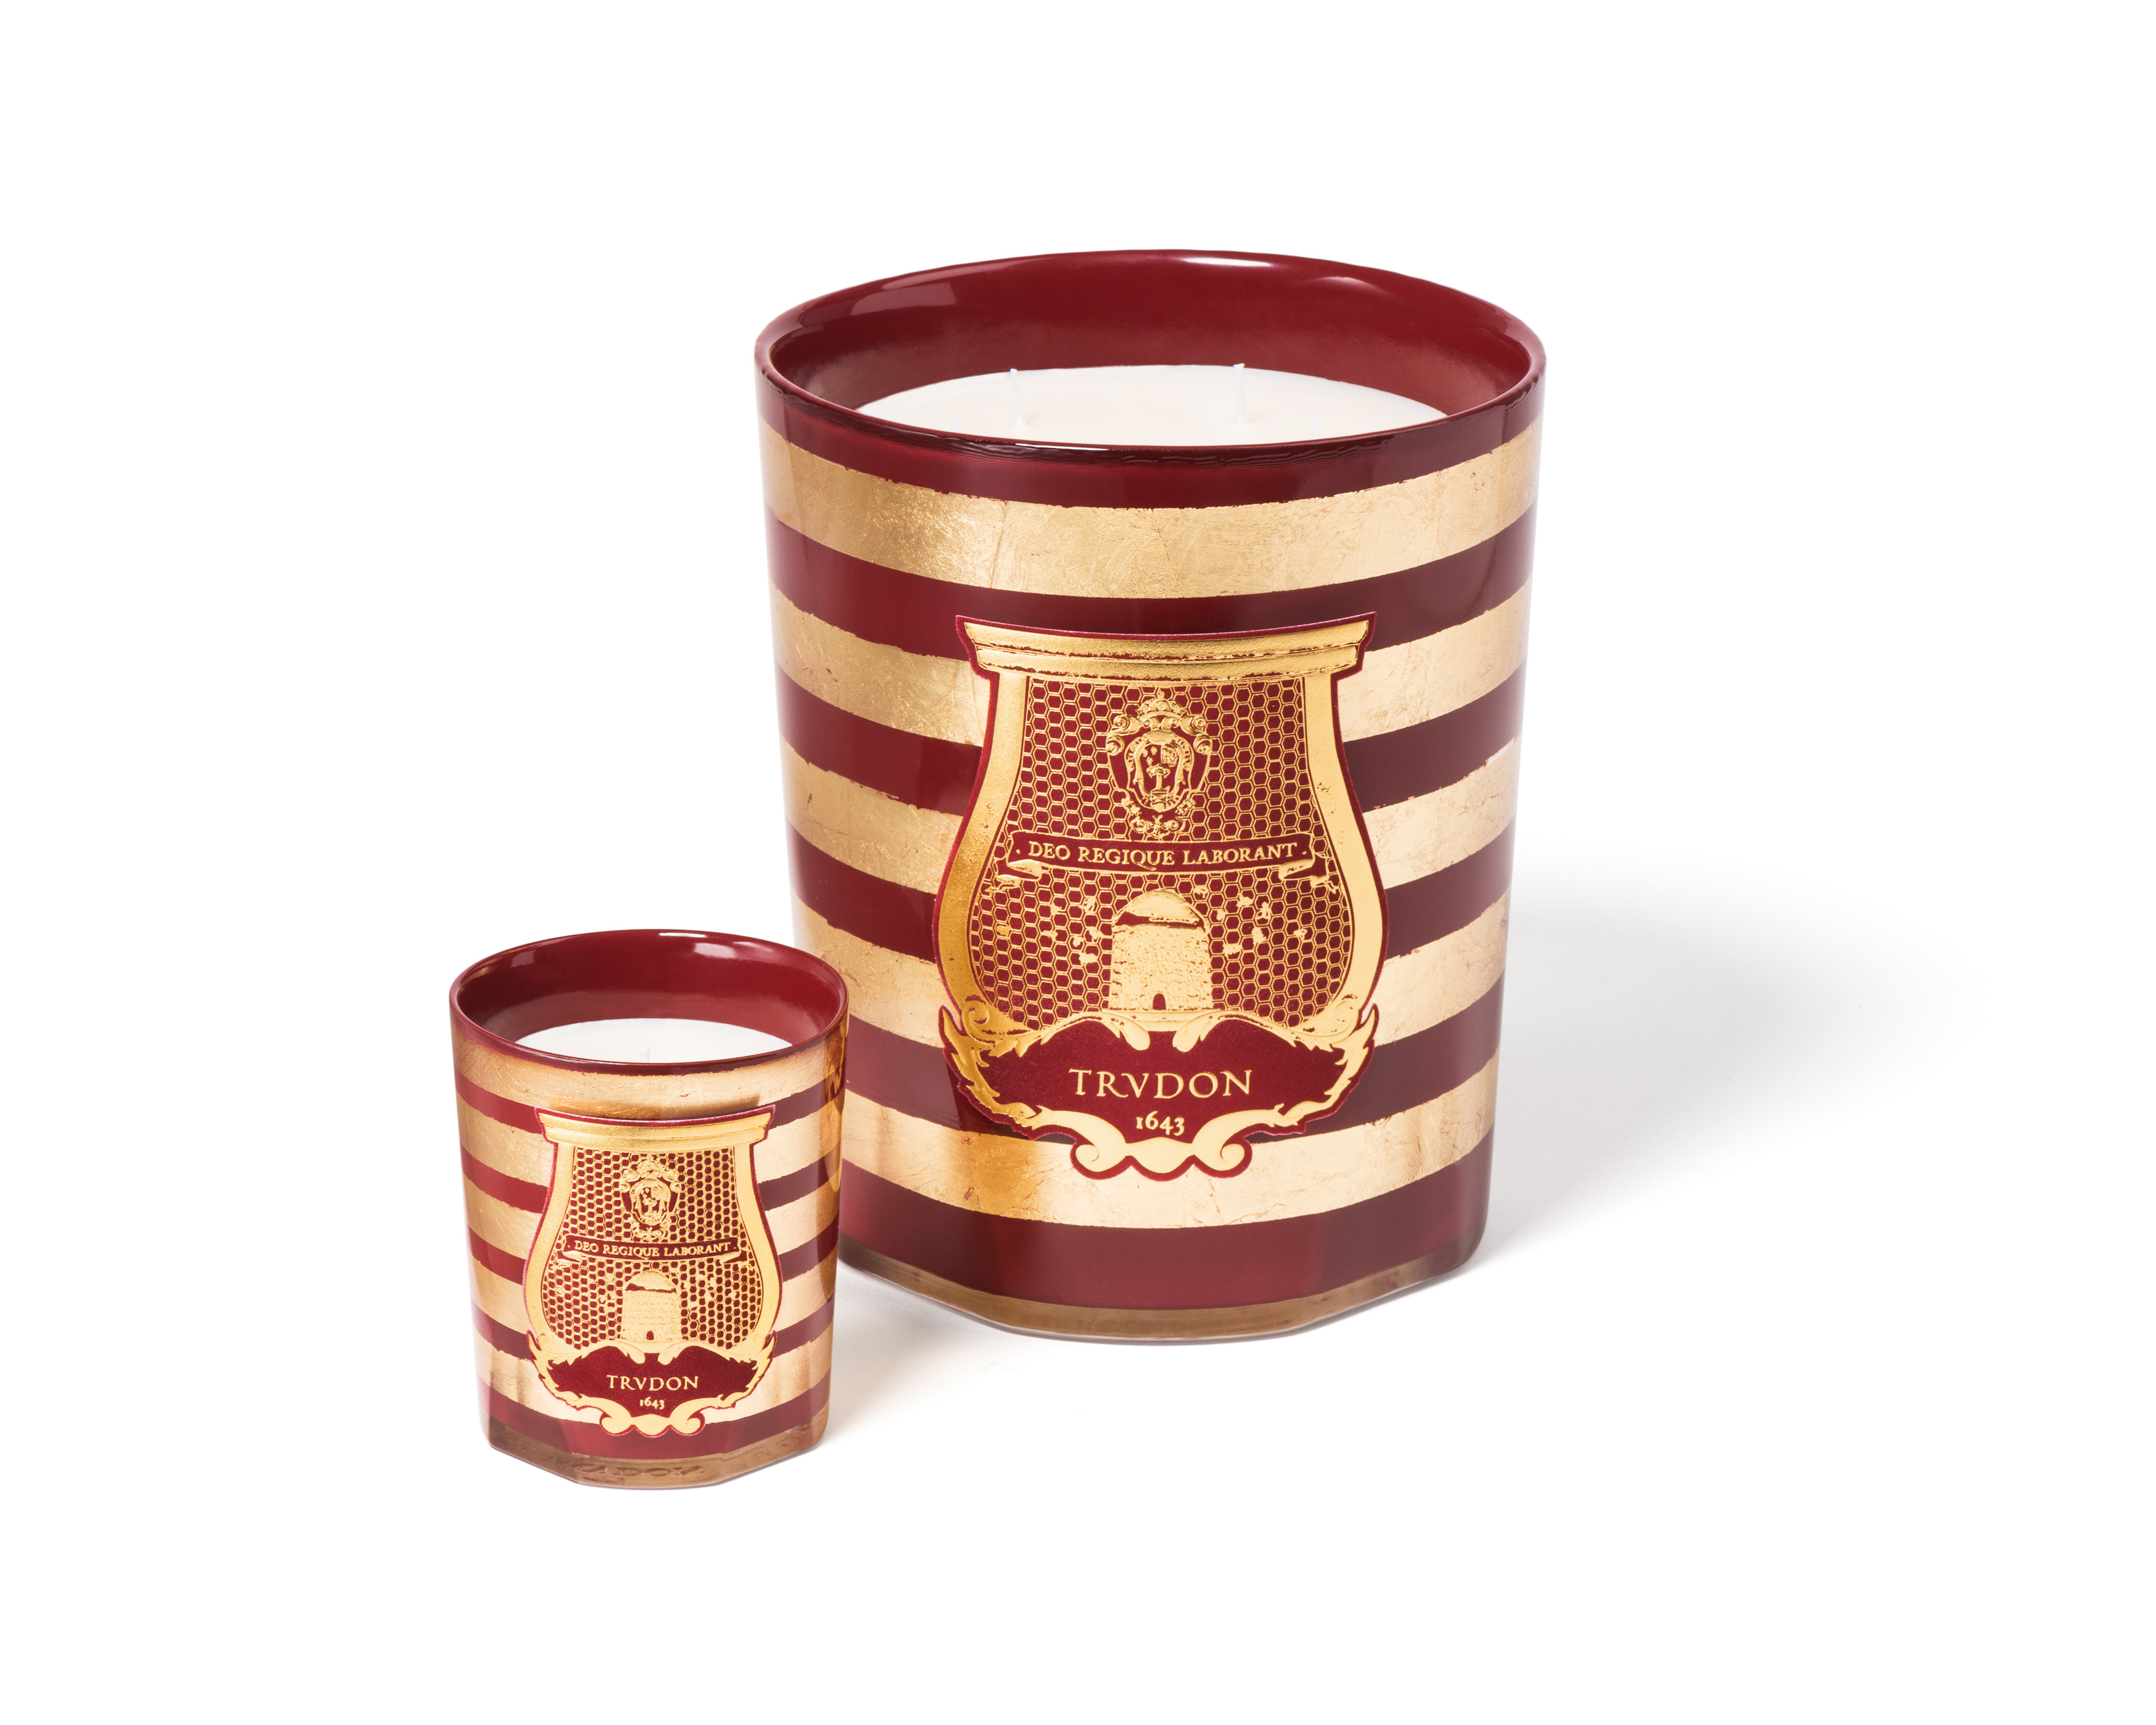 【Balmain x Trudon's Candle Will Make Your Home Smell Like Flowers】BY yahoo